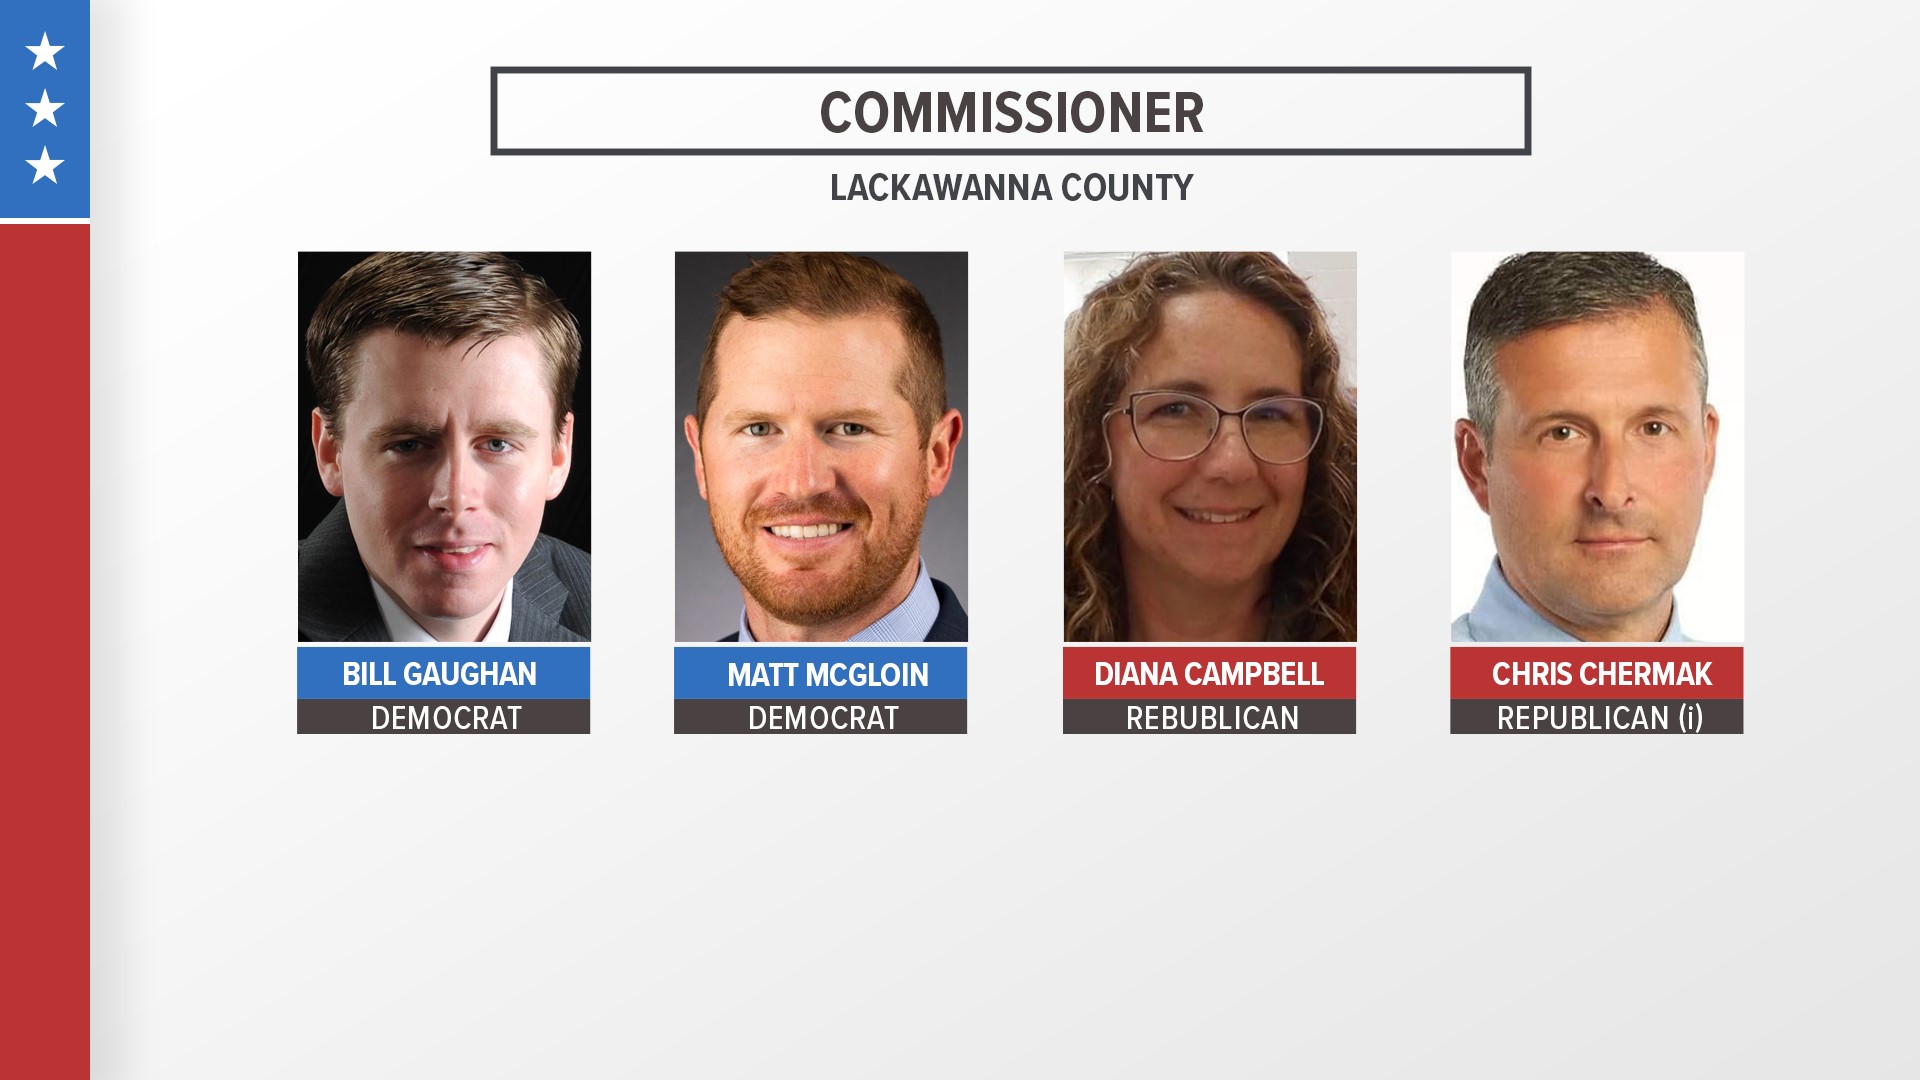 Democrats Gaughan, McGloin and Republican Chermak declare victory in Lackawanna County commissioner race